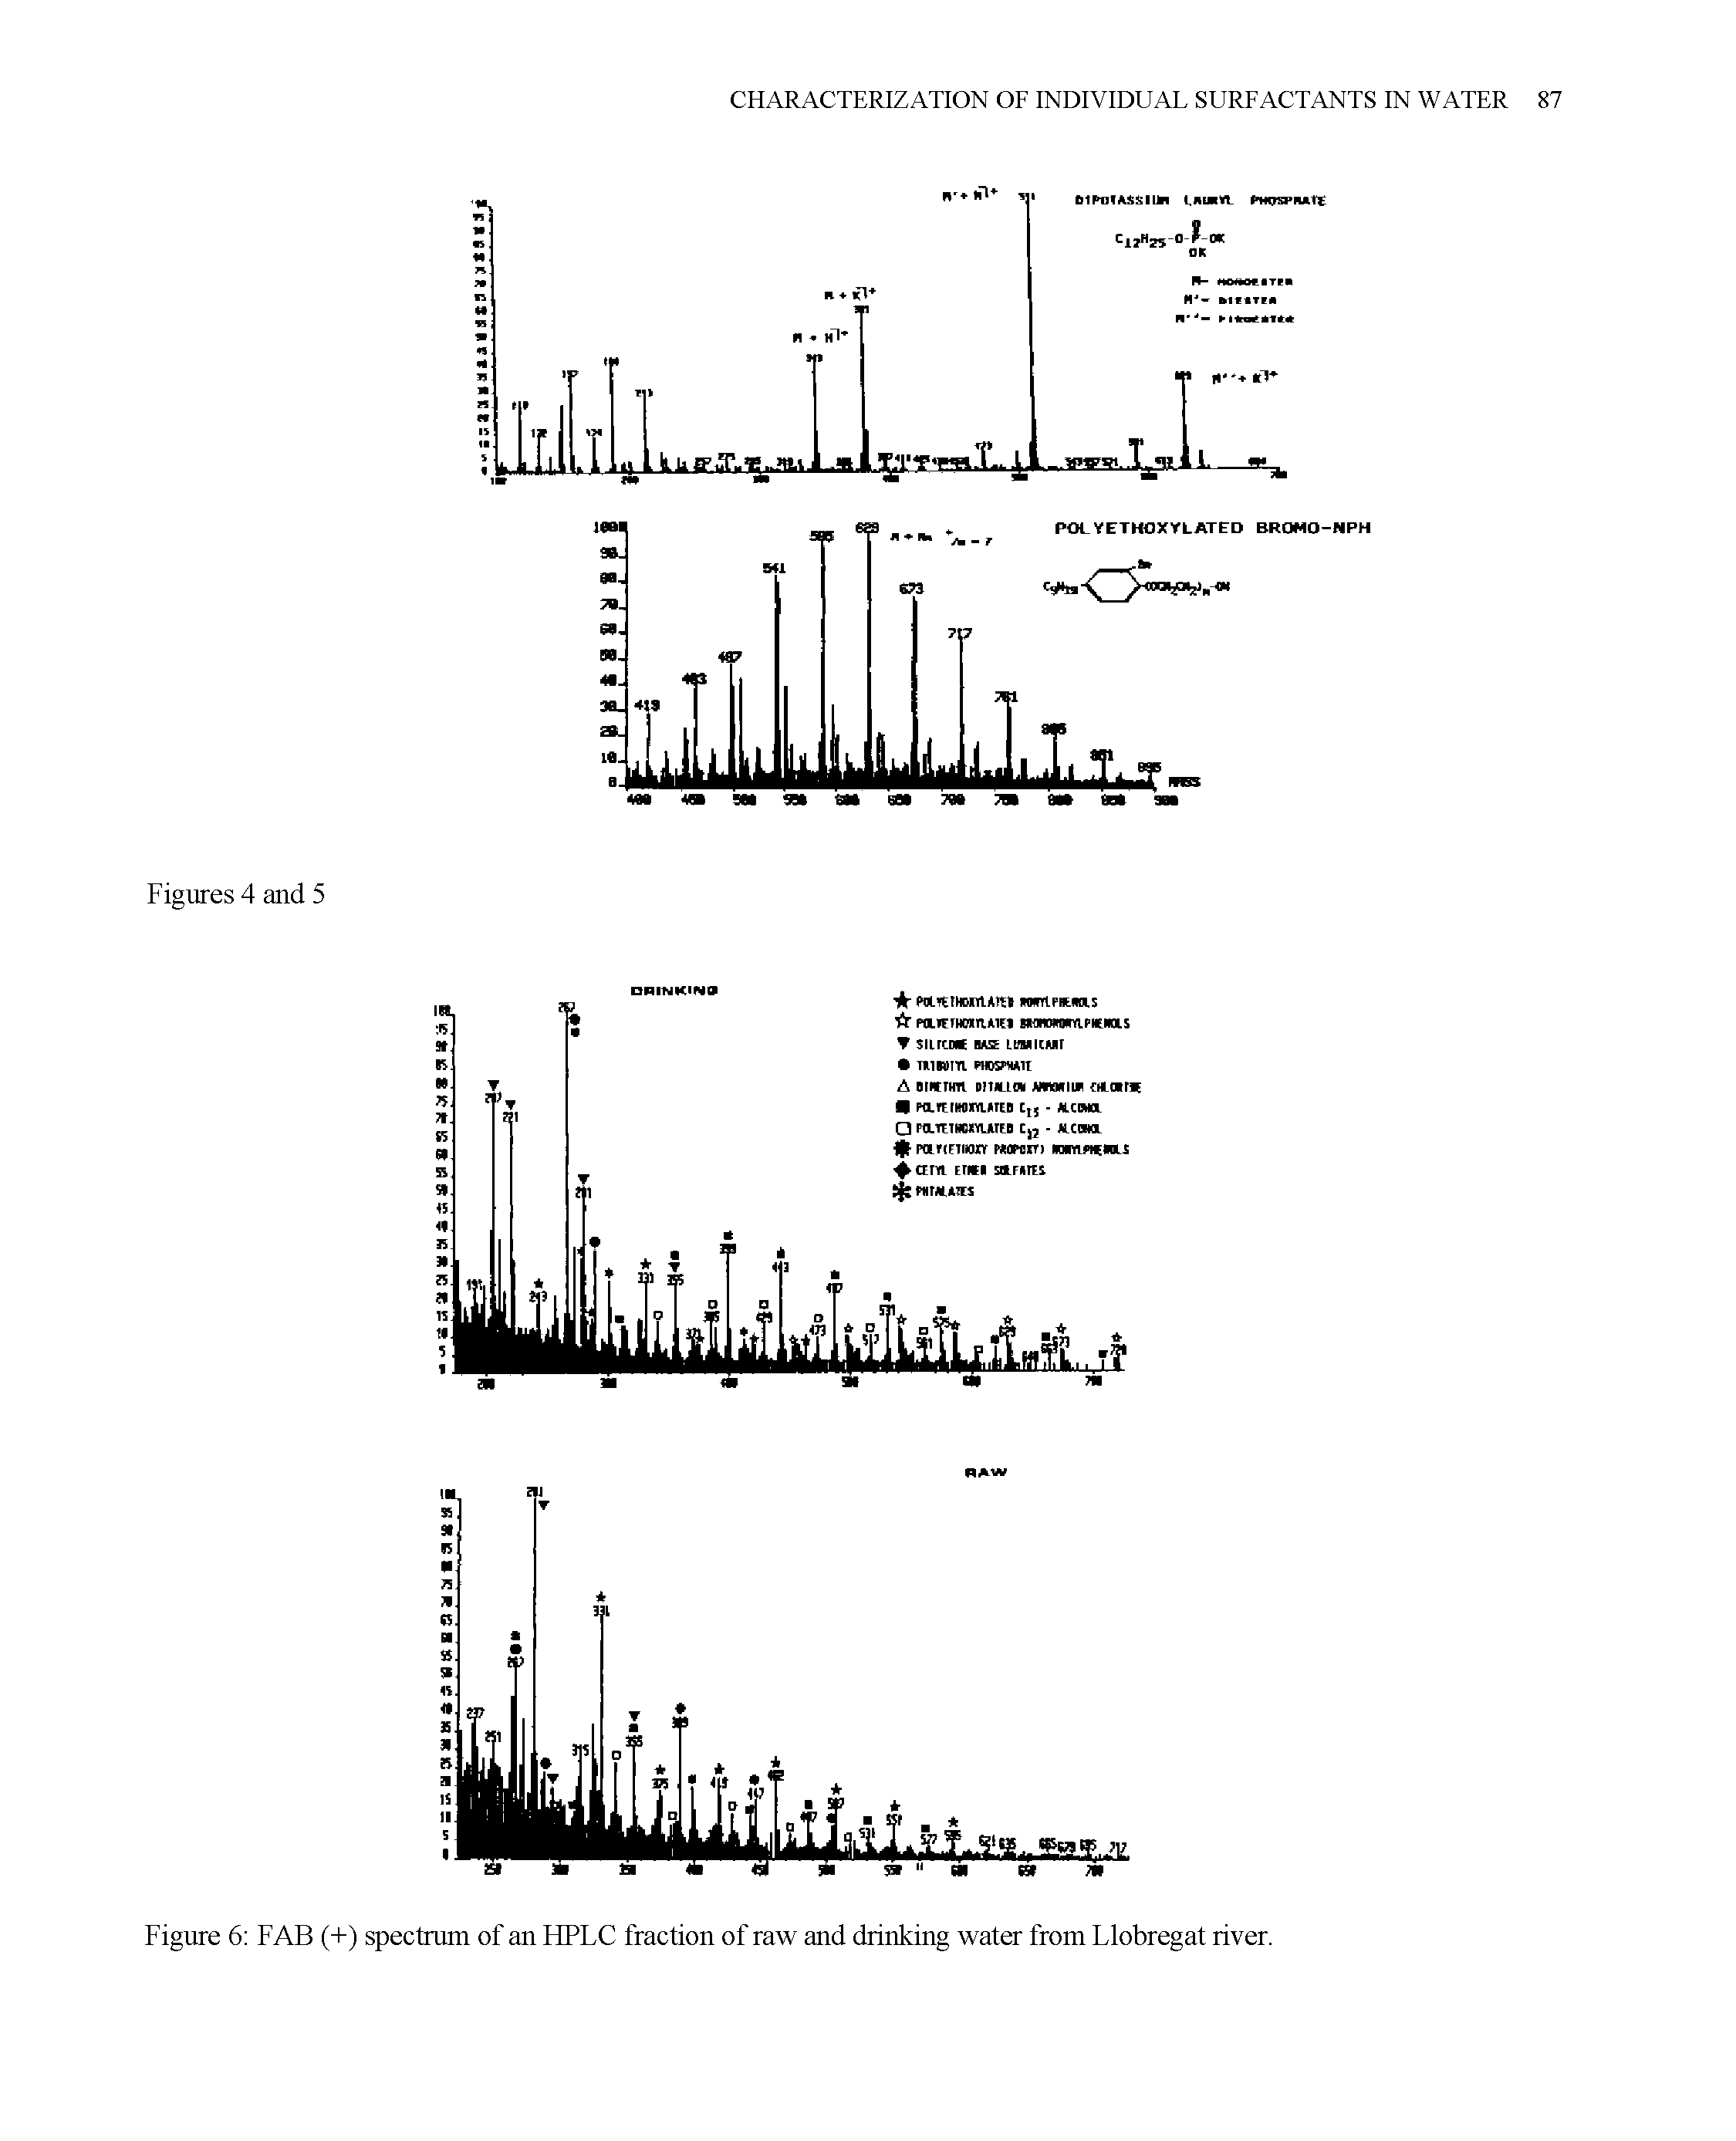 Figure 6 FAB (+) spectrum of an HPLC fraction of raw and drinking water from Llobregat river.